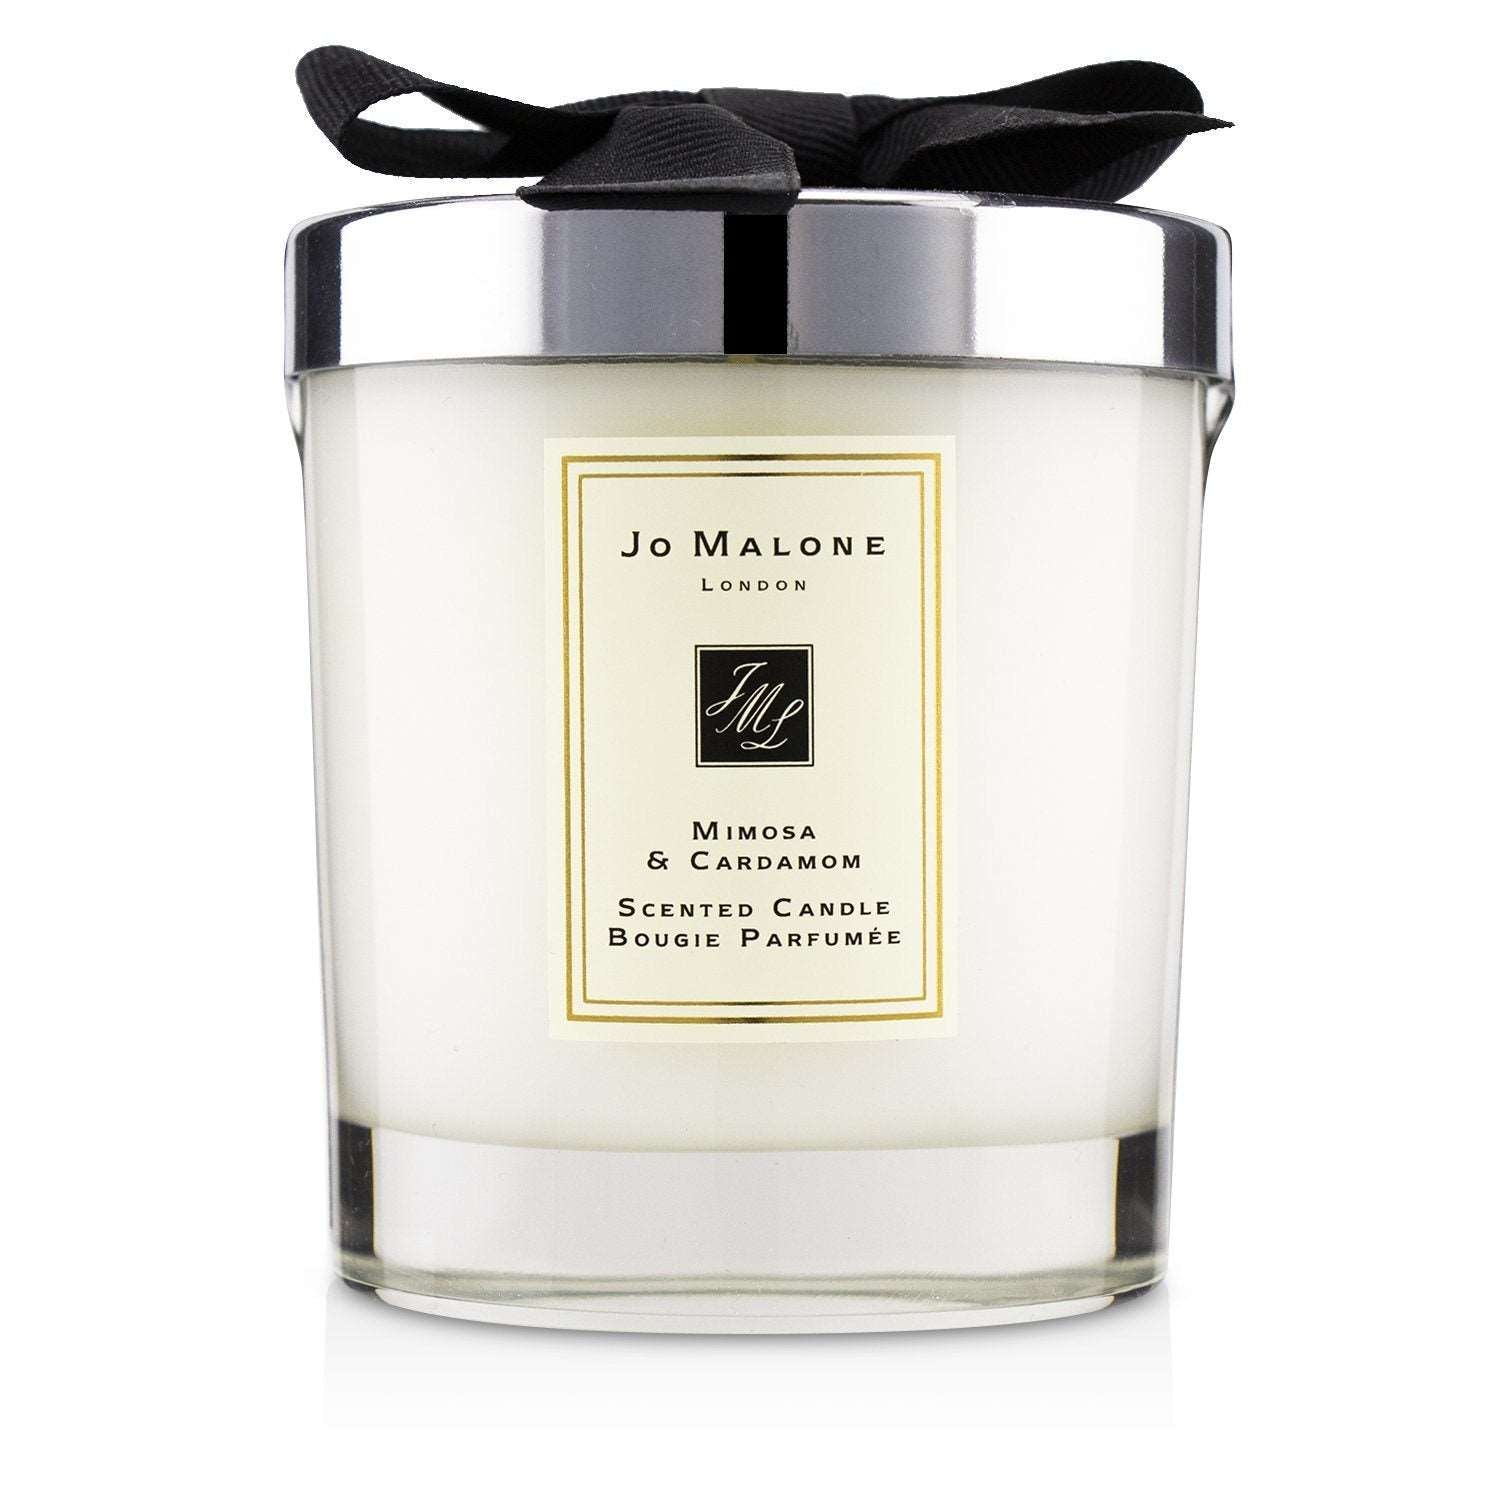 JO MALONE - Mimosa & Cardamom Scented Candle - 200g (2.5 inch) 3P's Inclusive Beauty